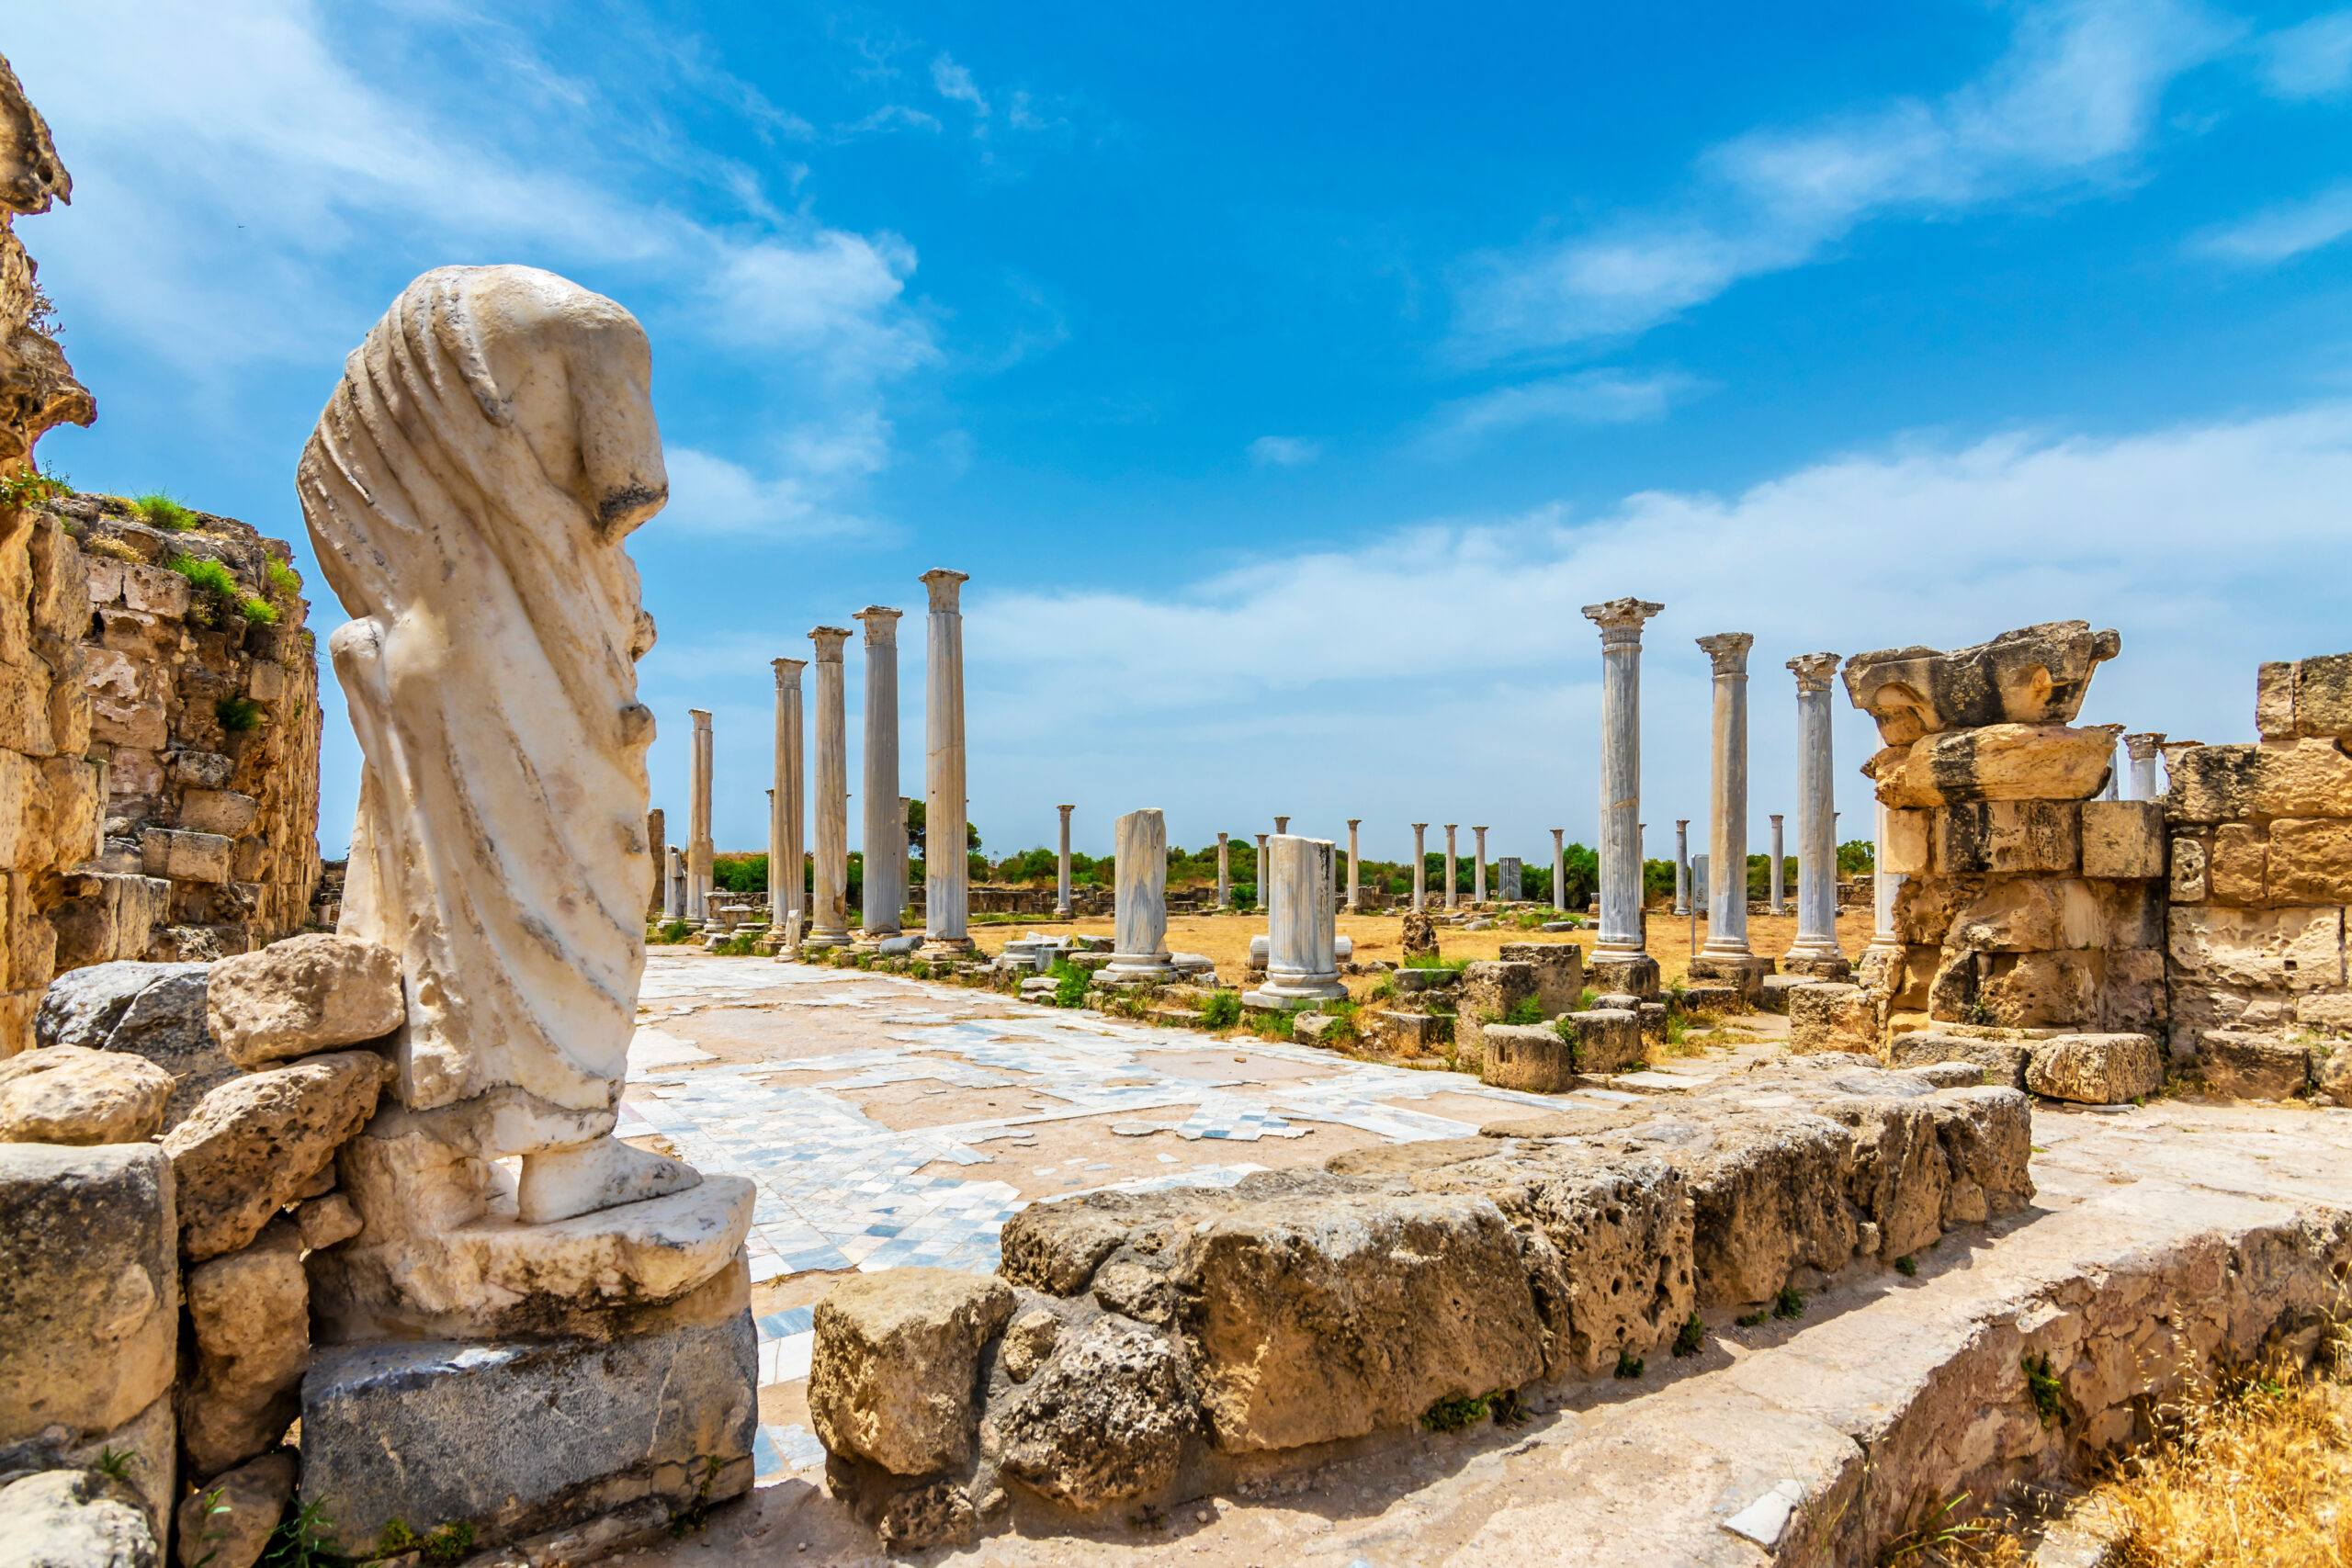 Ancient city with statues and pillars.